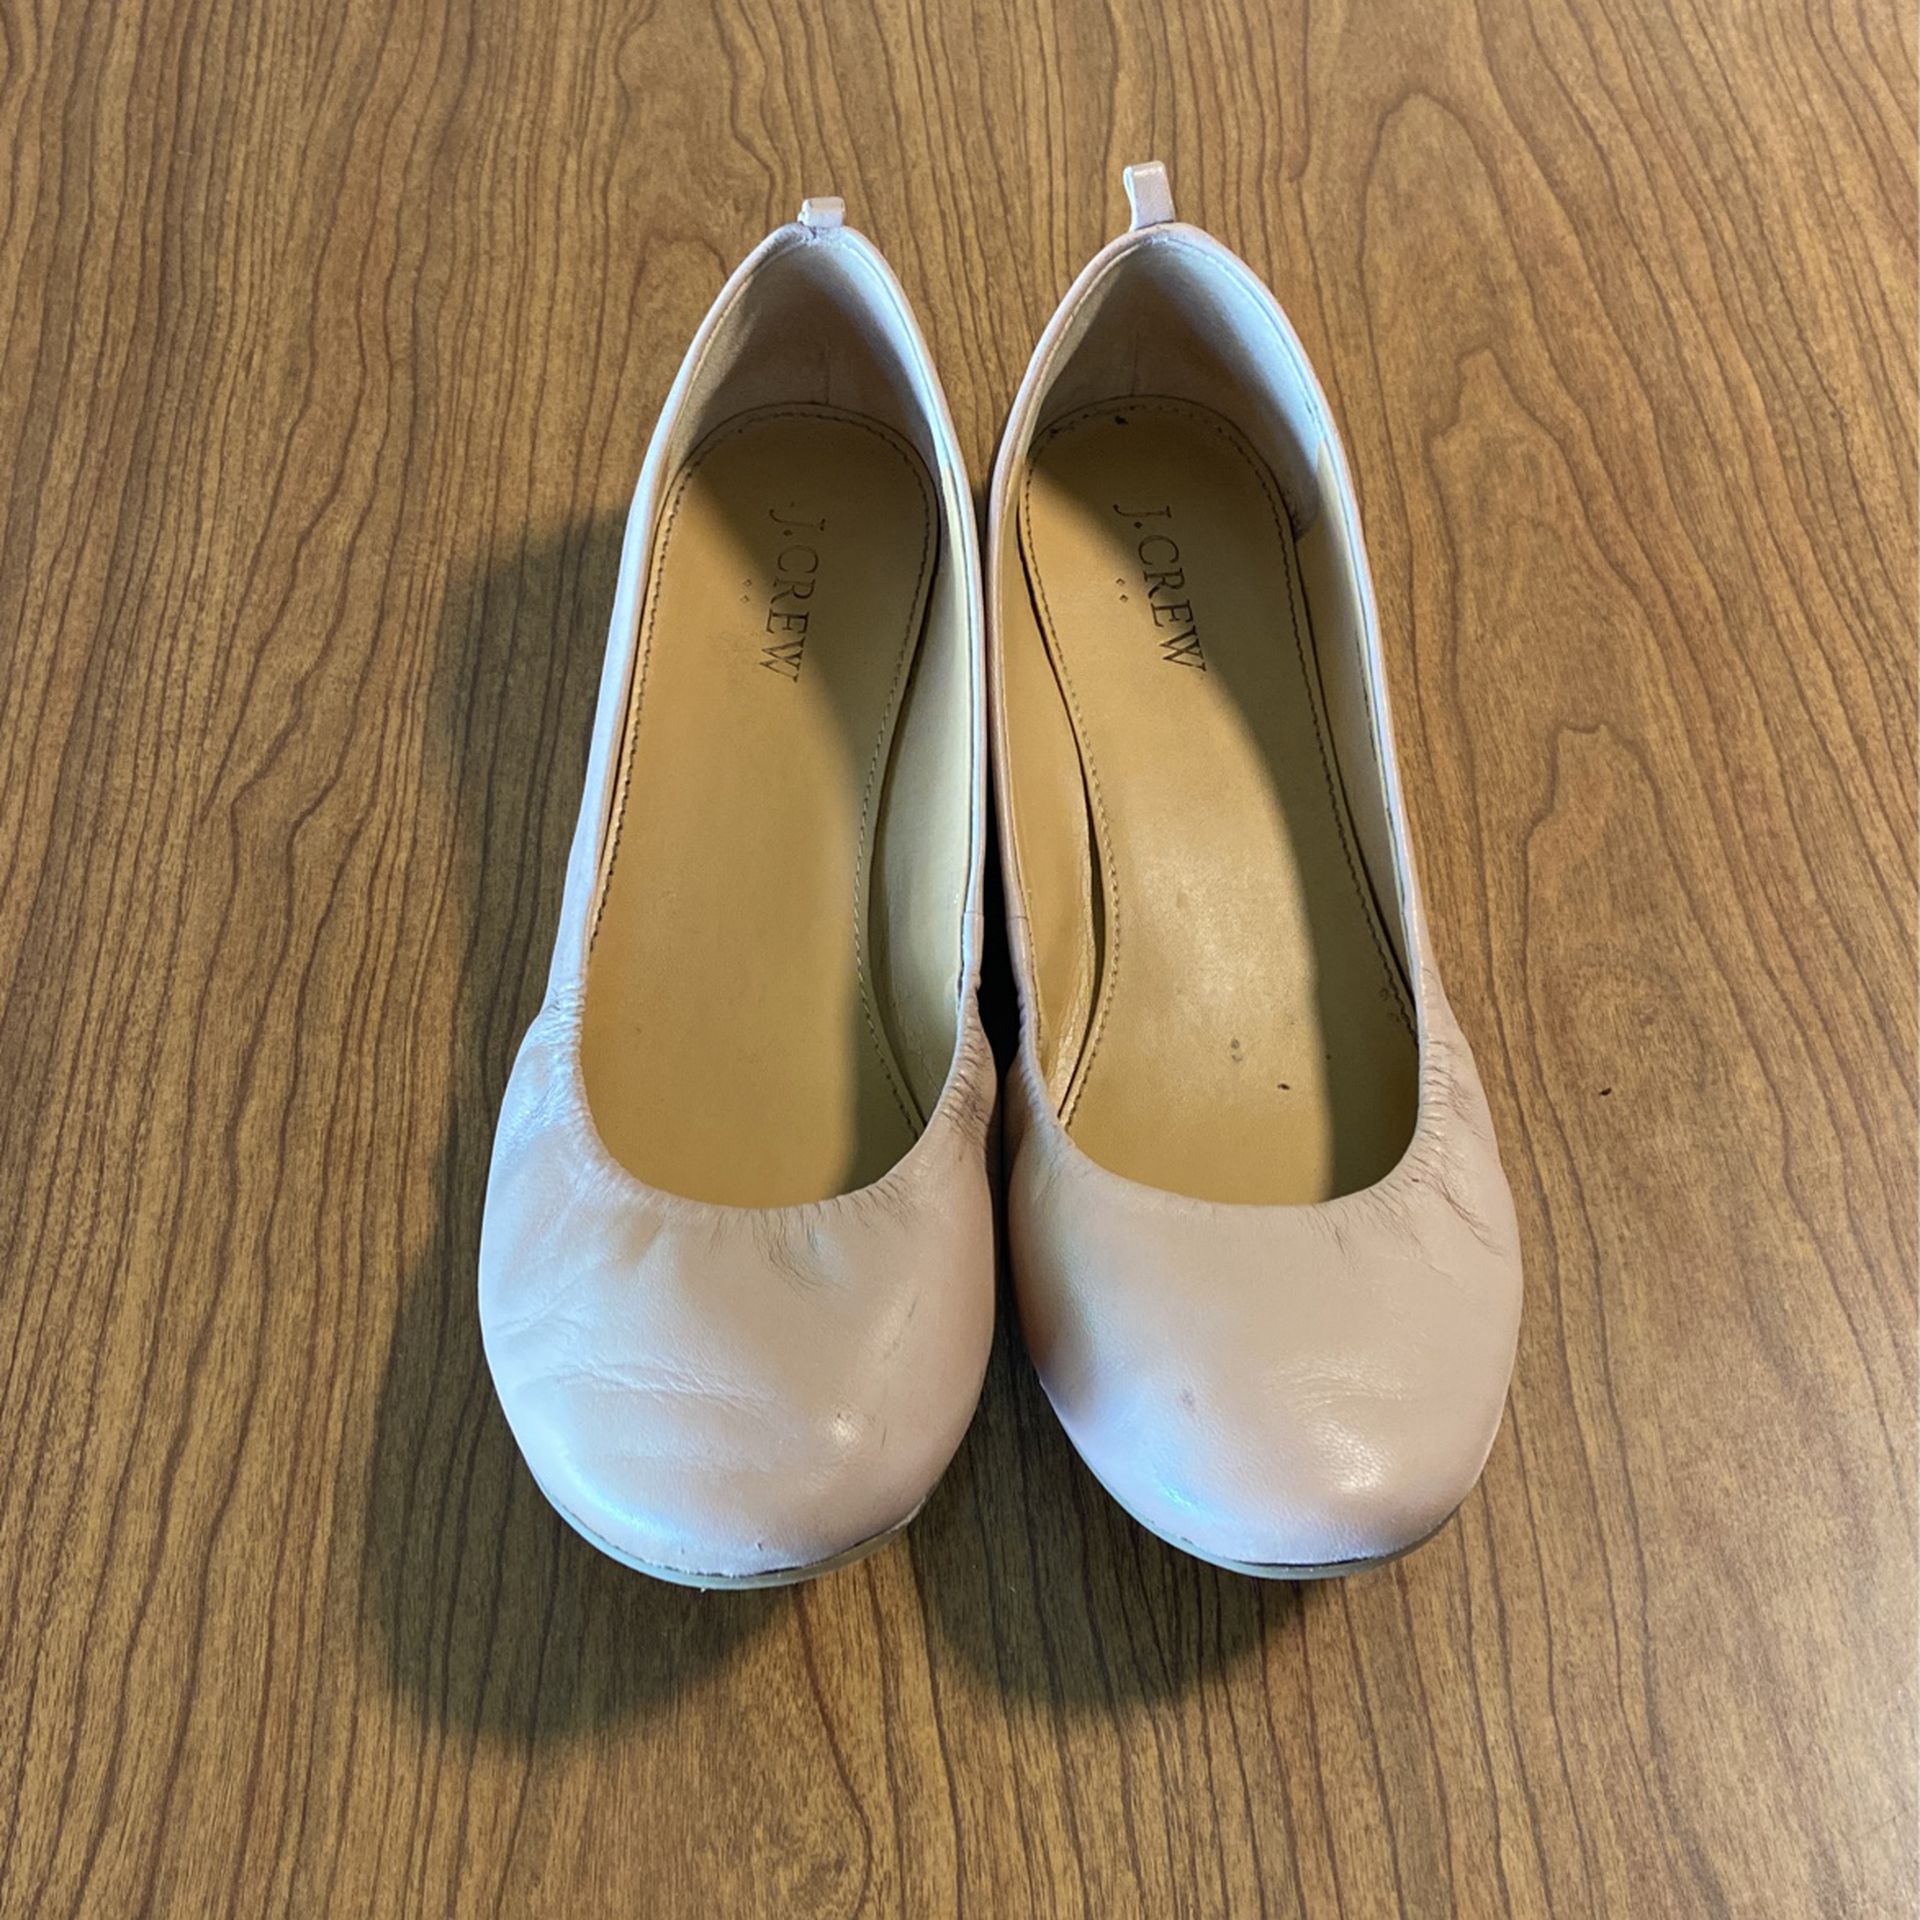 J Crew Nude Pink Flats Shoes Size 7